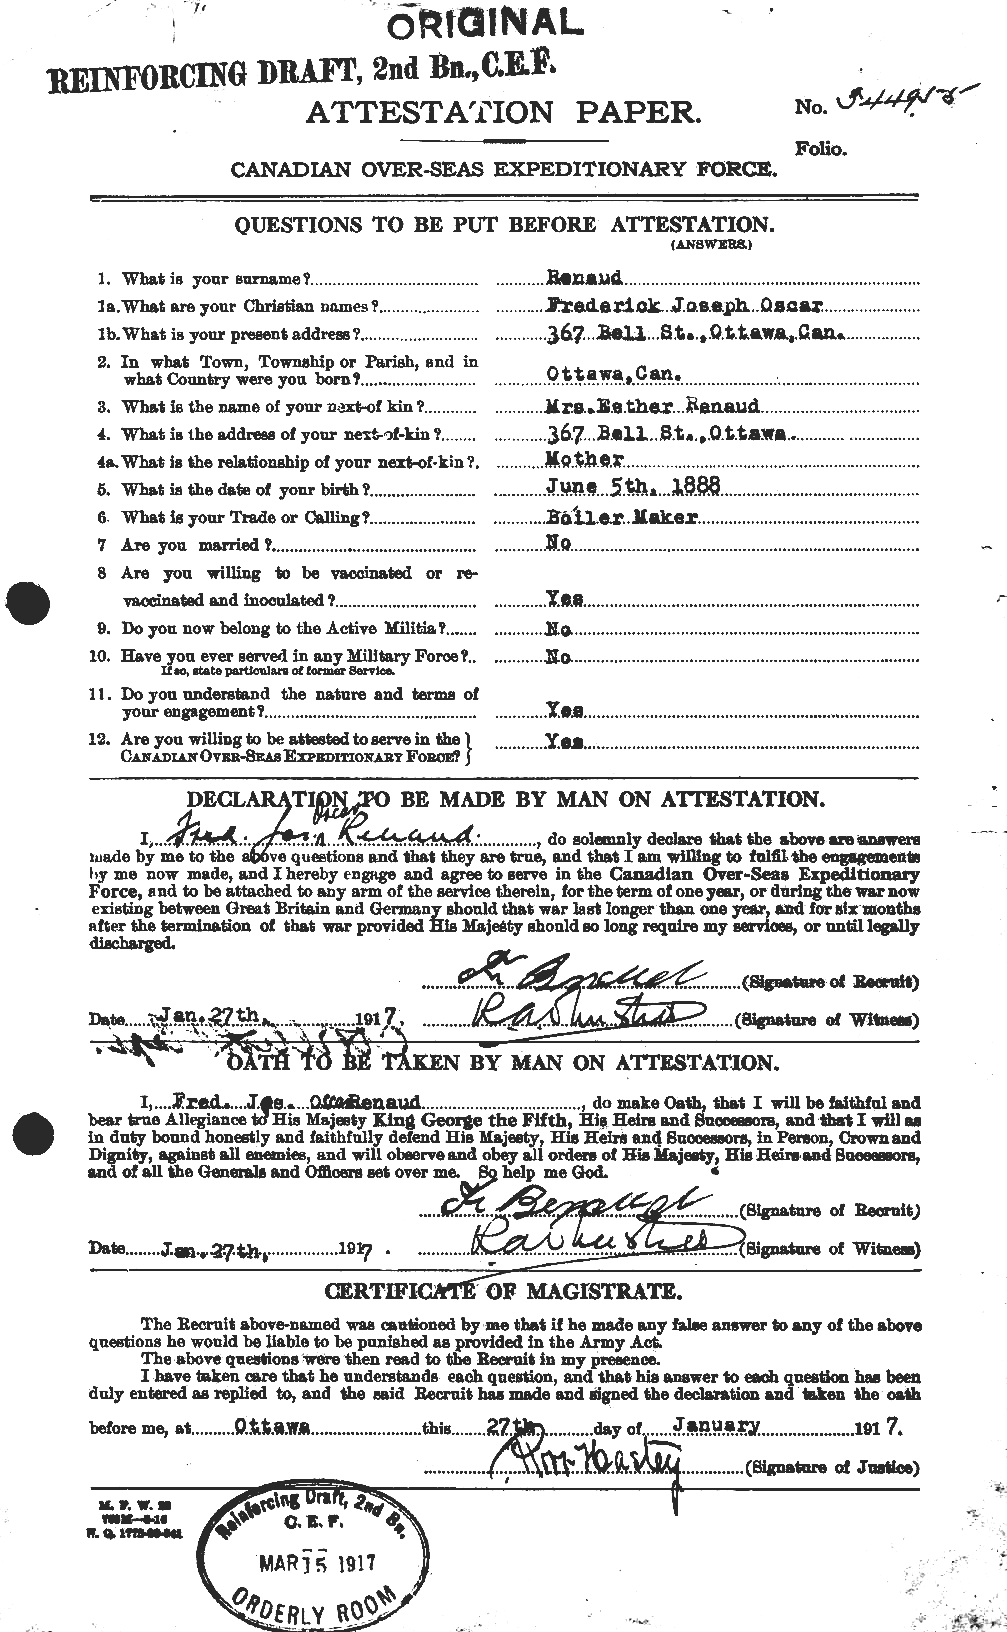 Personnel Records of the First World War - CEF 599649a